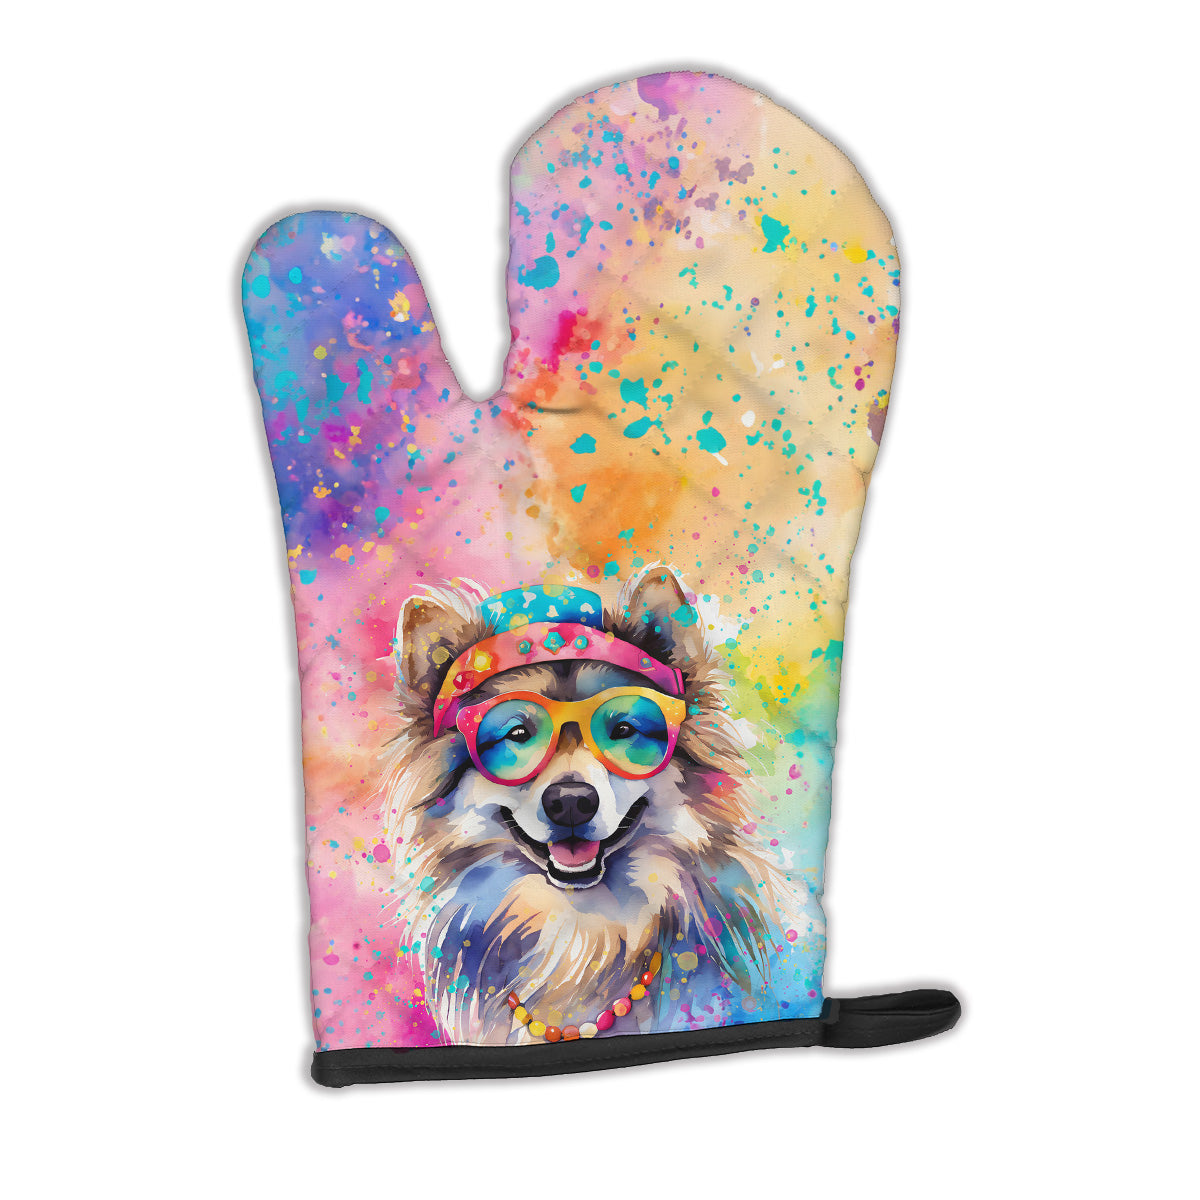 Buy this Keeshond Hippie Dawg Oven Mitt